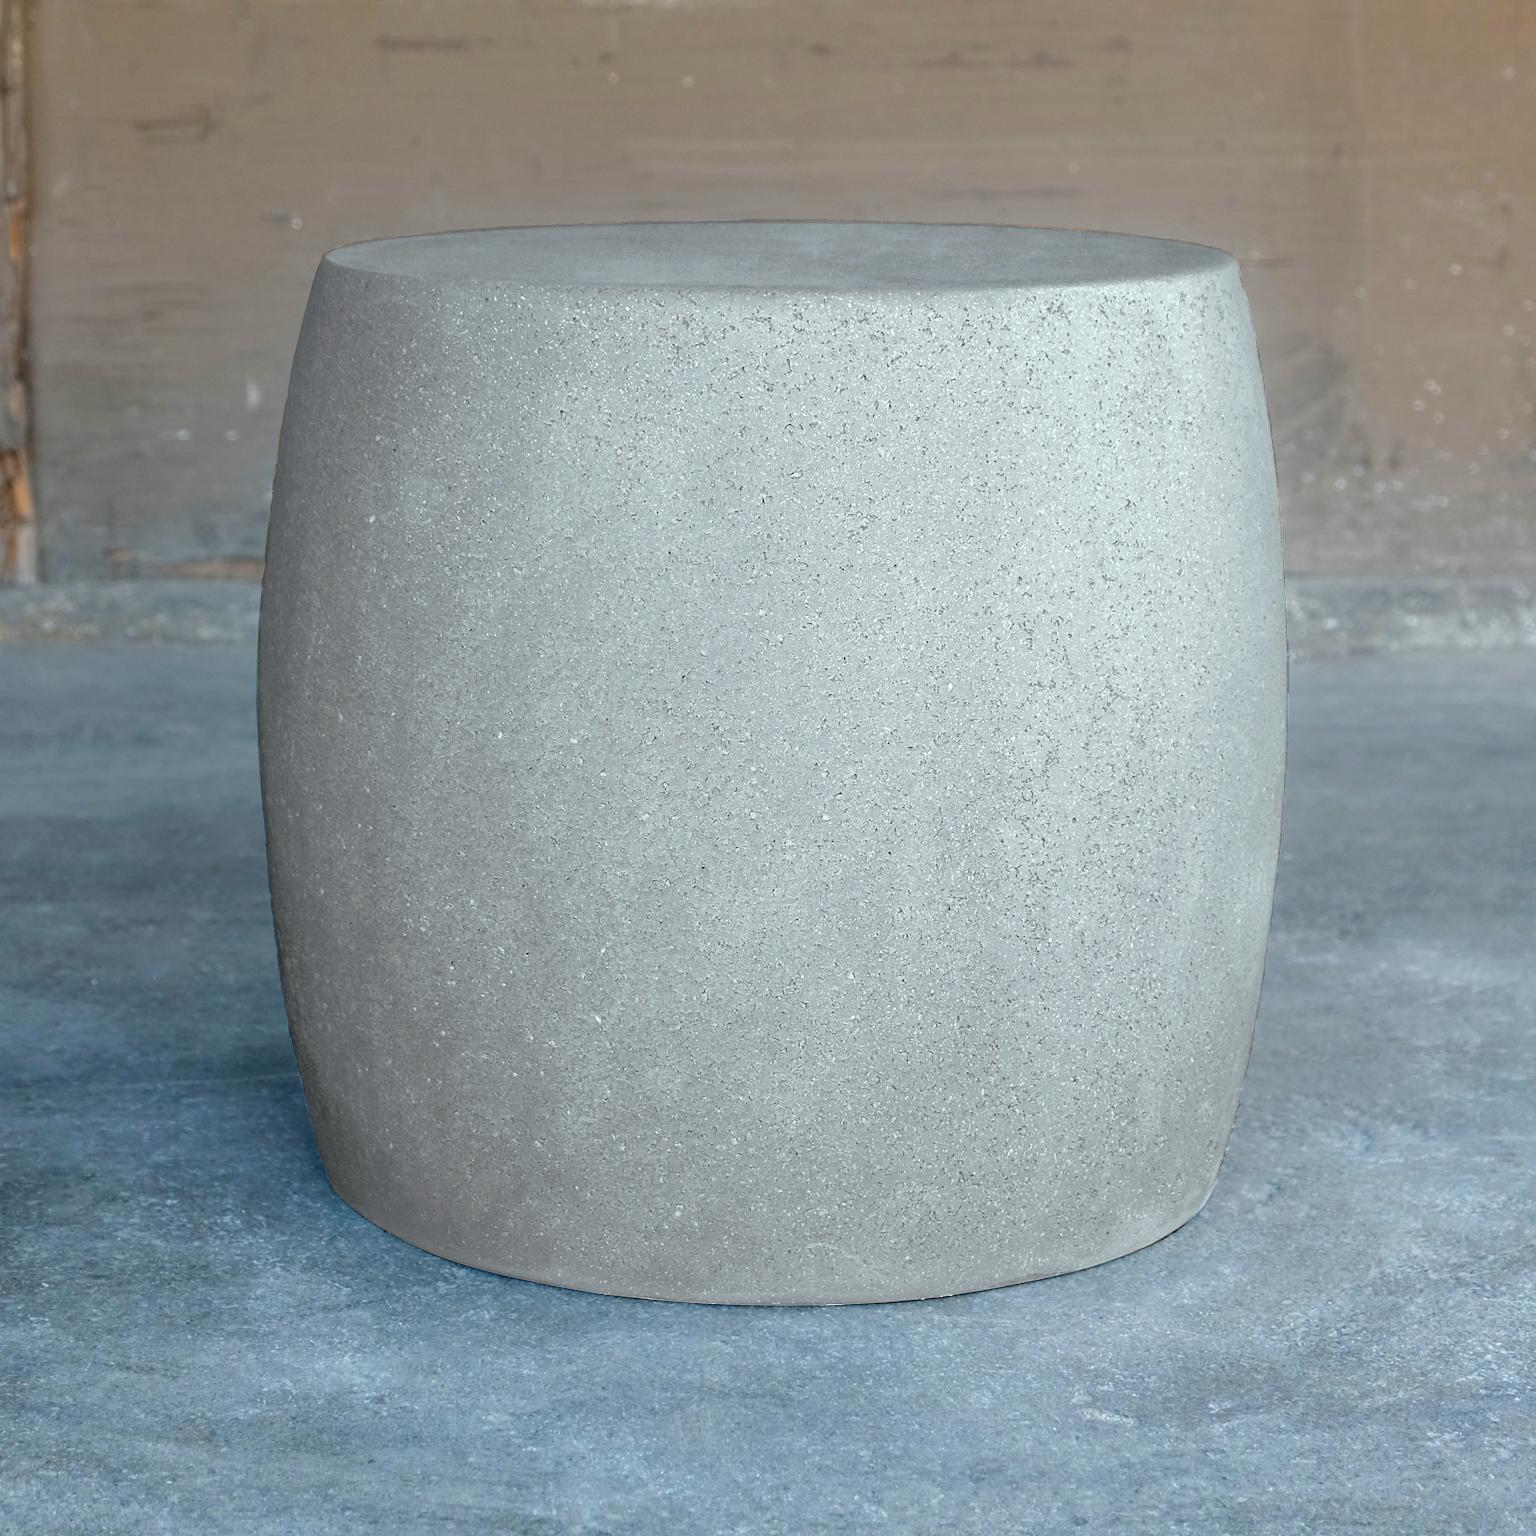 Versatility and elegance distilled into simplicity. 

Dimensions: Diameter 20 in. (51 cm), height 18 in. (46 cm), weight 20 lbs. (9 kg).

Finish Color options:
white stone
natural stone 
aged stone
keystone (shown)
coal stone 

Materials: